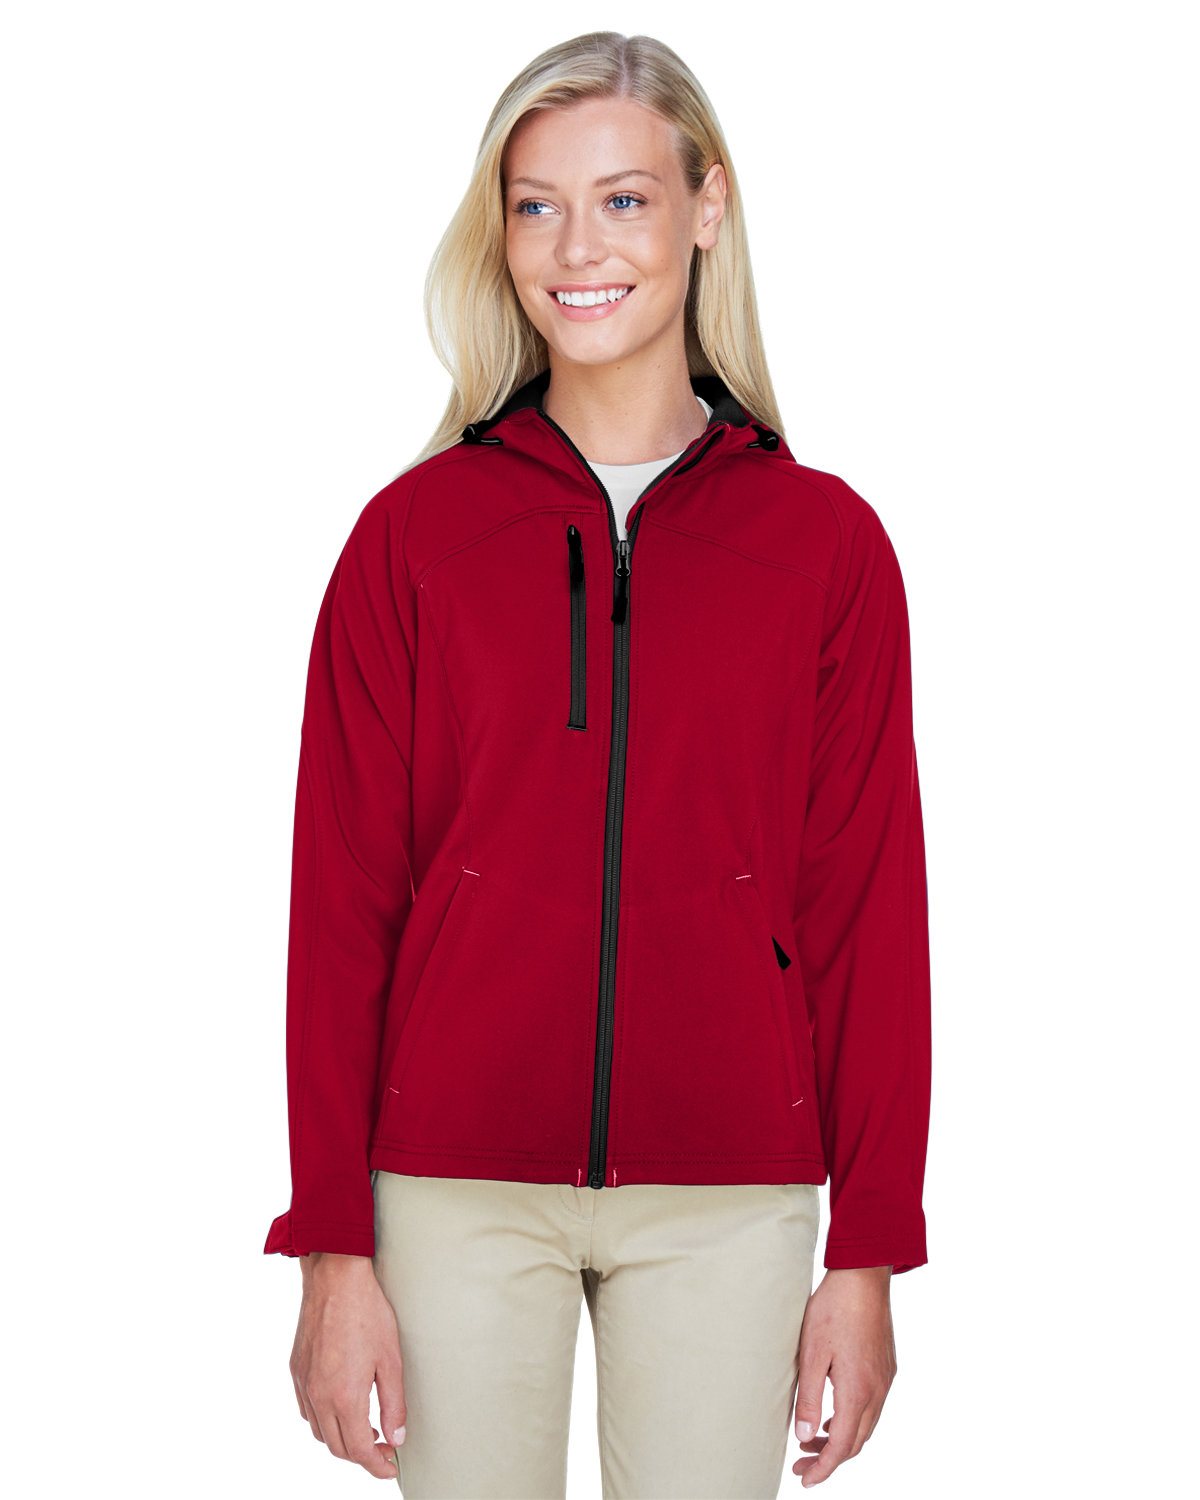 North End Ladies' Prospect Two-Layer Fleece Bonded Soft Shell Hooded Jacket MOLTEN RED 